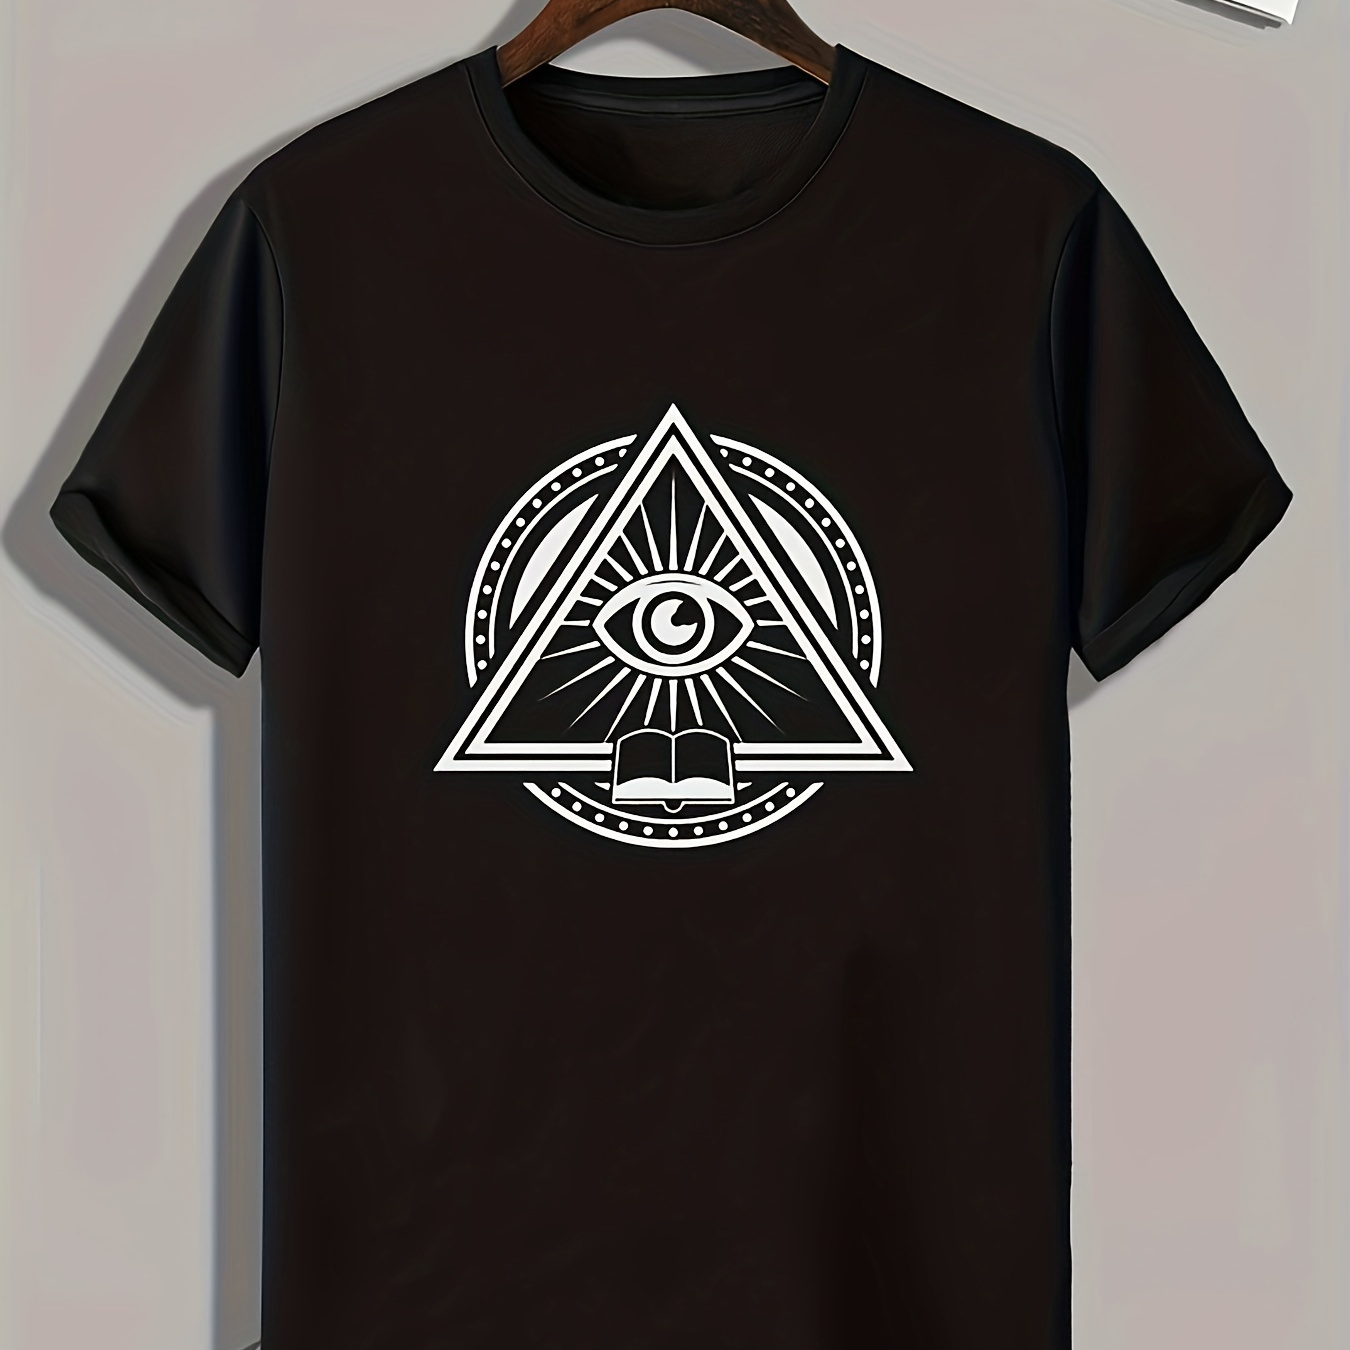 

Triangle Eye Pattern Print Men's Comfy Sports T-shirt, Graphic Tee Men's Summer Outdoor Clothes, Men's Clothing For Fitness Activities, Gift For Men